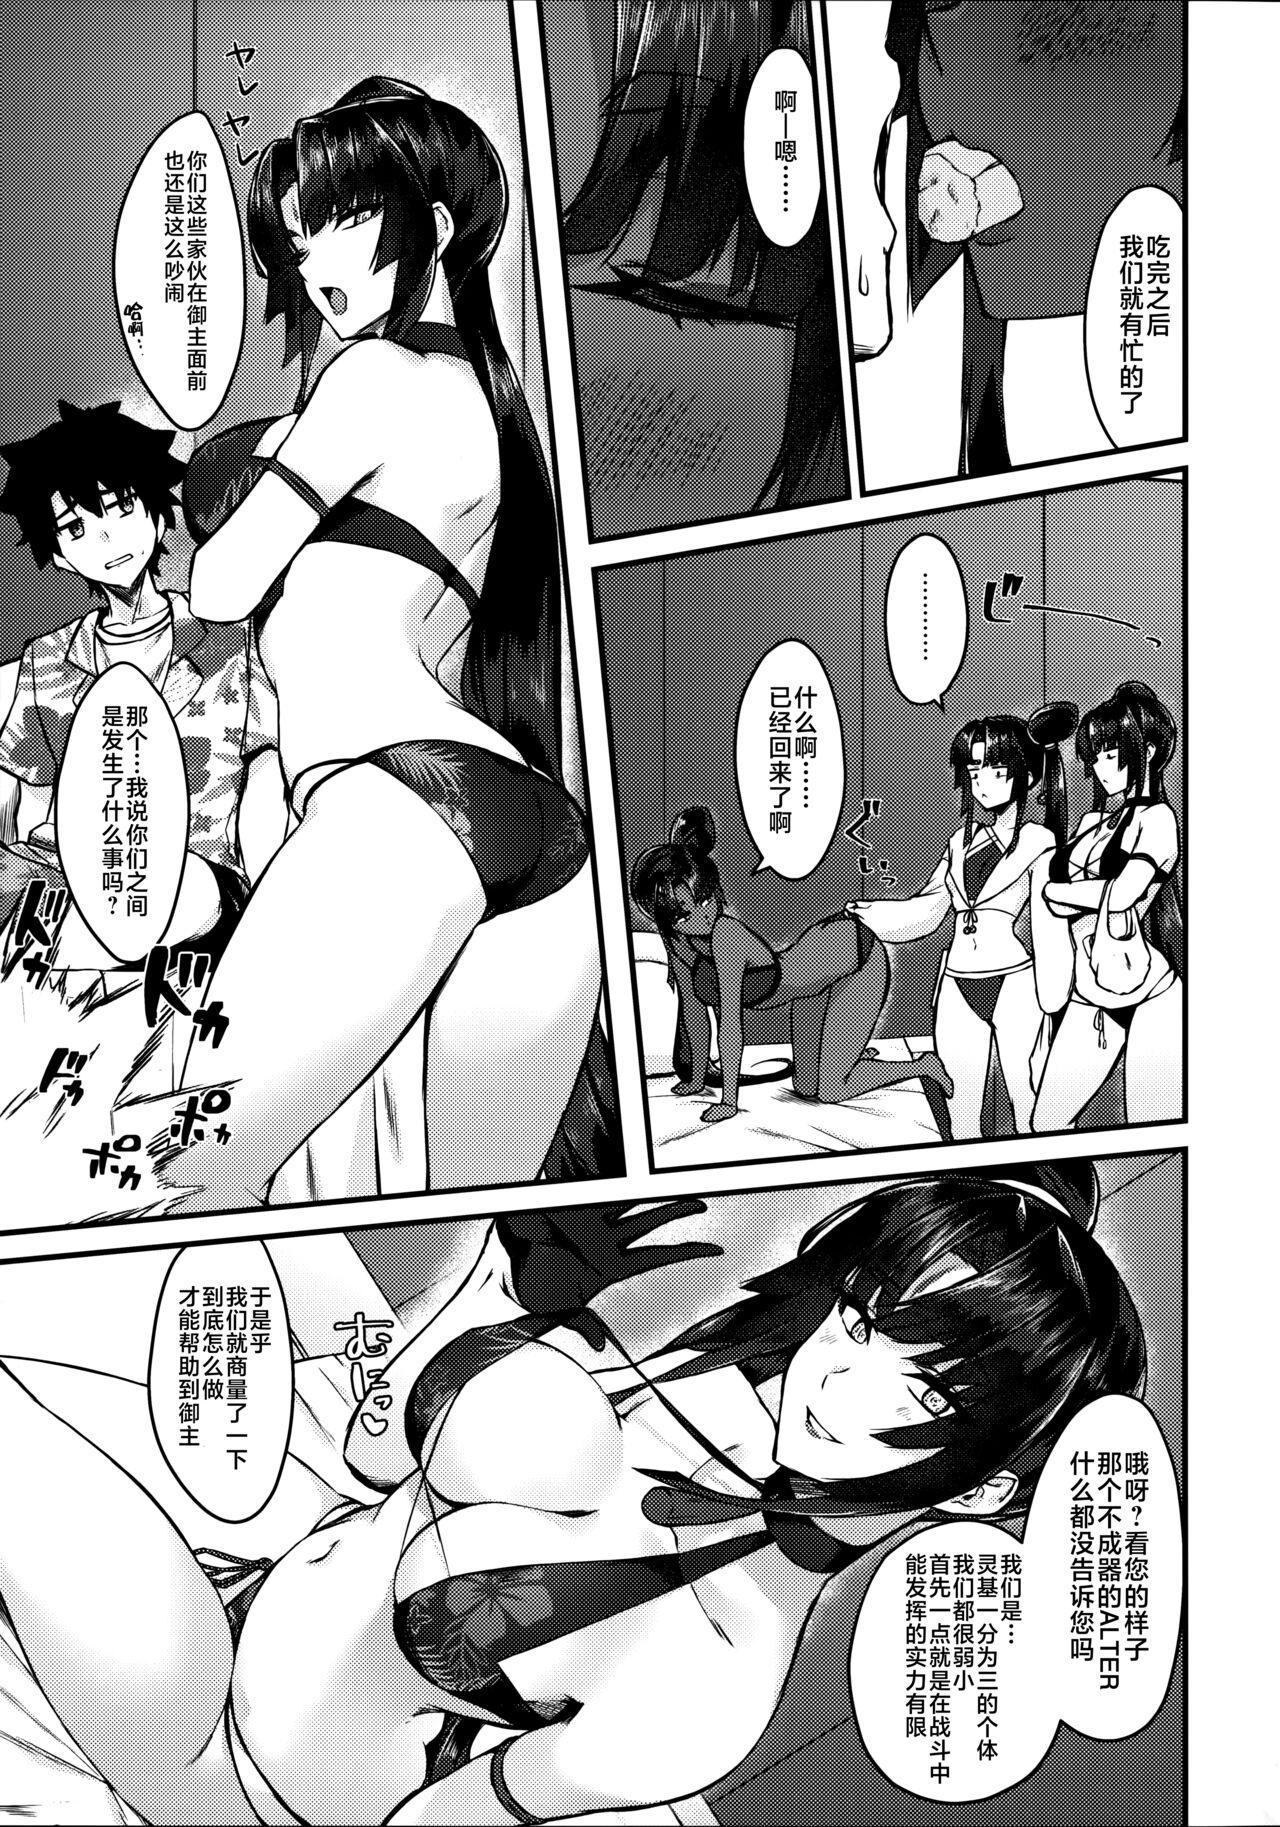 Best Blow Job Ever 牛くらべ - Fate grand order Gay Twinks - Page 7